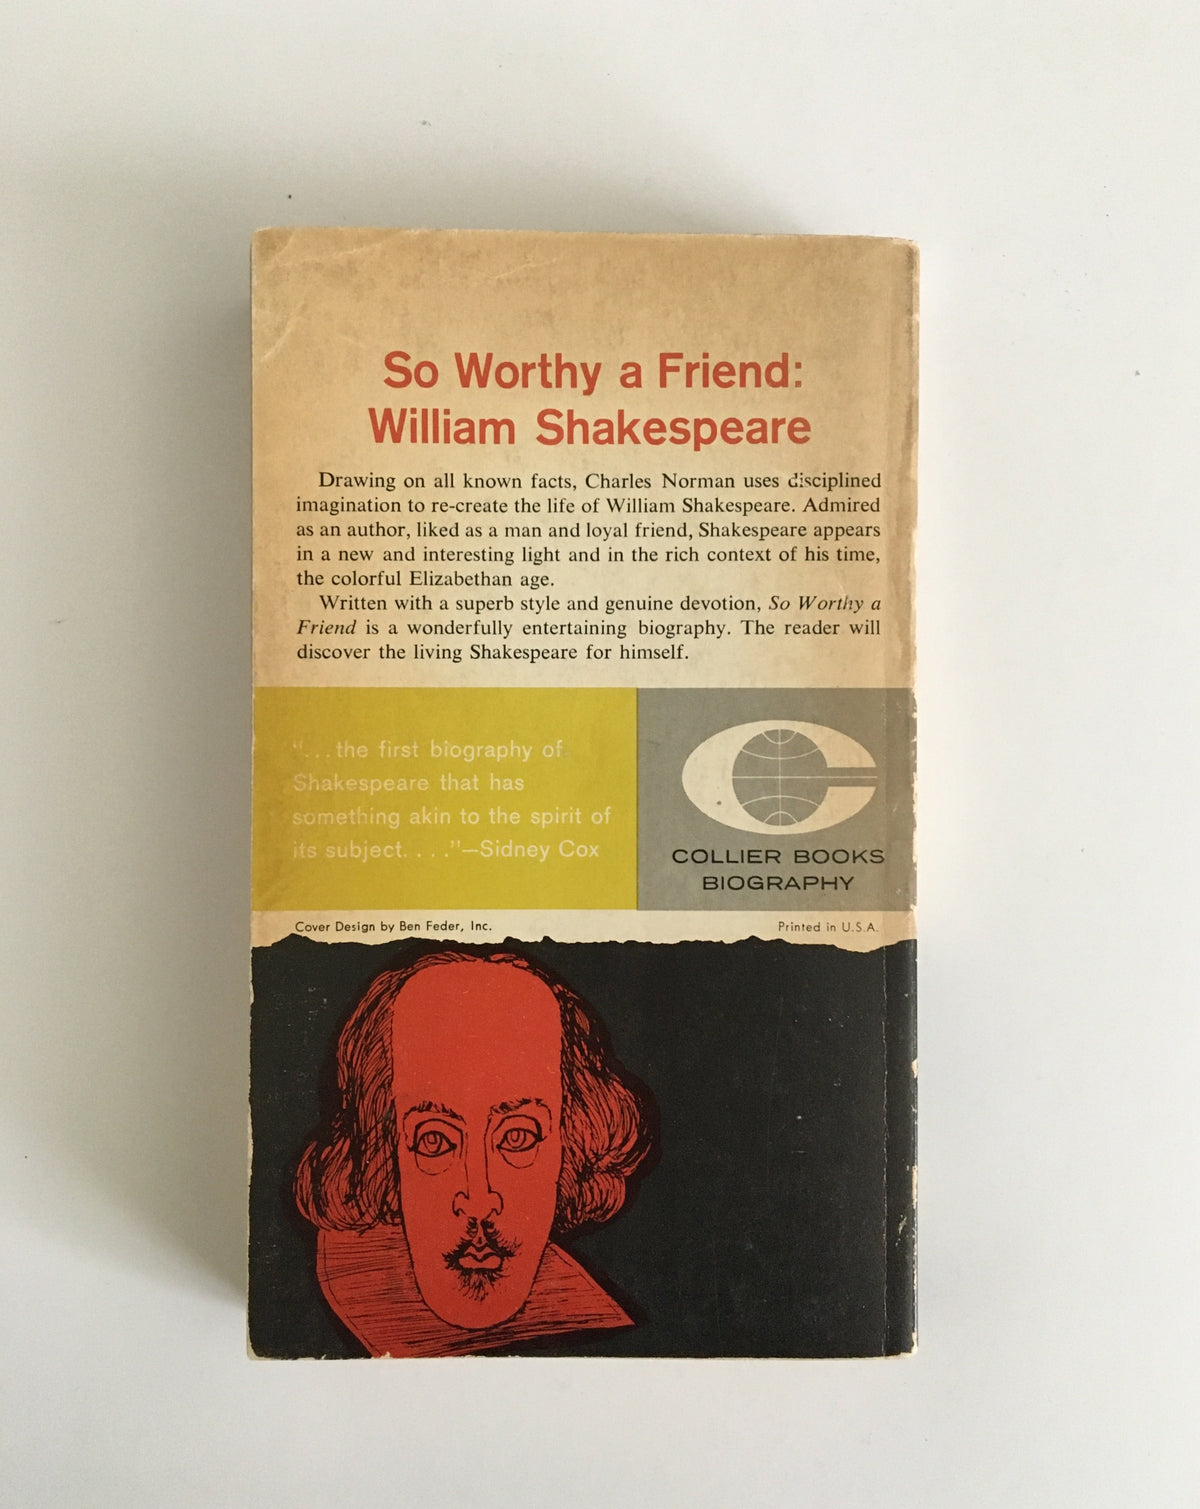 So Worthy a Friend: William Shakespeare by Charles Norman